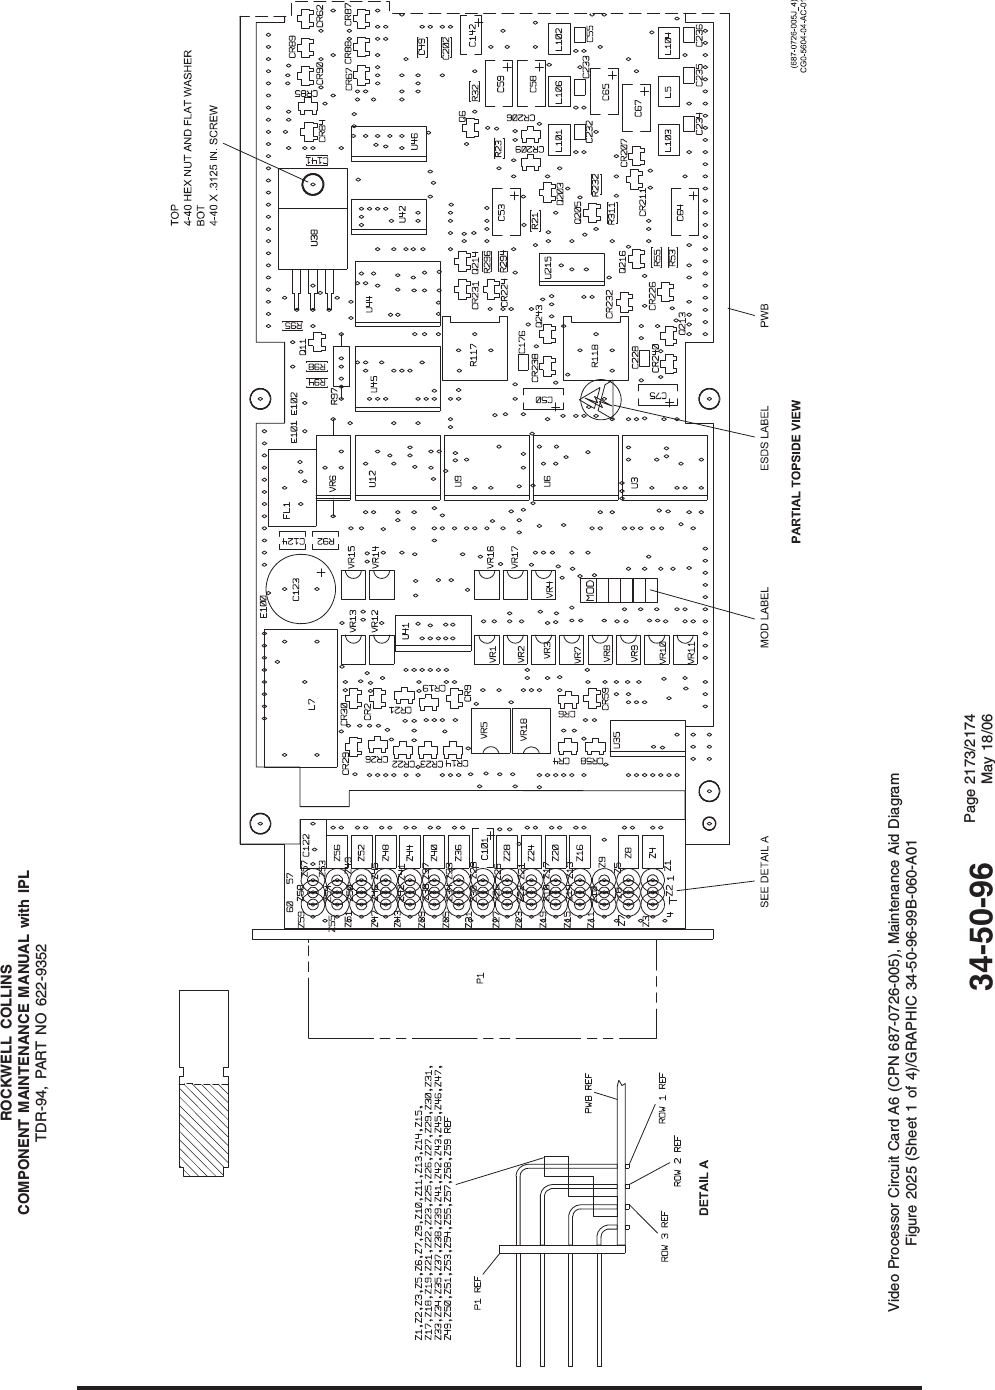 ROCKWELL COLLINSCOMPONENT MAINTENANCE MANUAL with IPLTDR-94, PART NO 622-9352Video Processor Circuit Card A6 (CPN 687-0726-005), Maintenance Aid DiagramFigure 2025 (Sheet 1 of 4)/GRAPHIC 34-50-96-99B-060-A0134-50-96 Page 2173/2174May 18/06